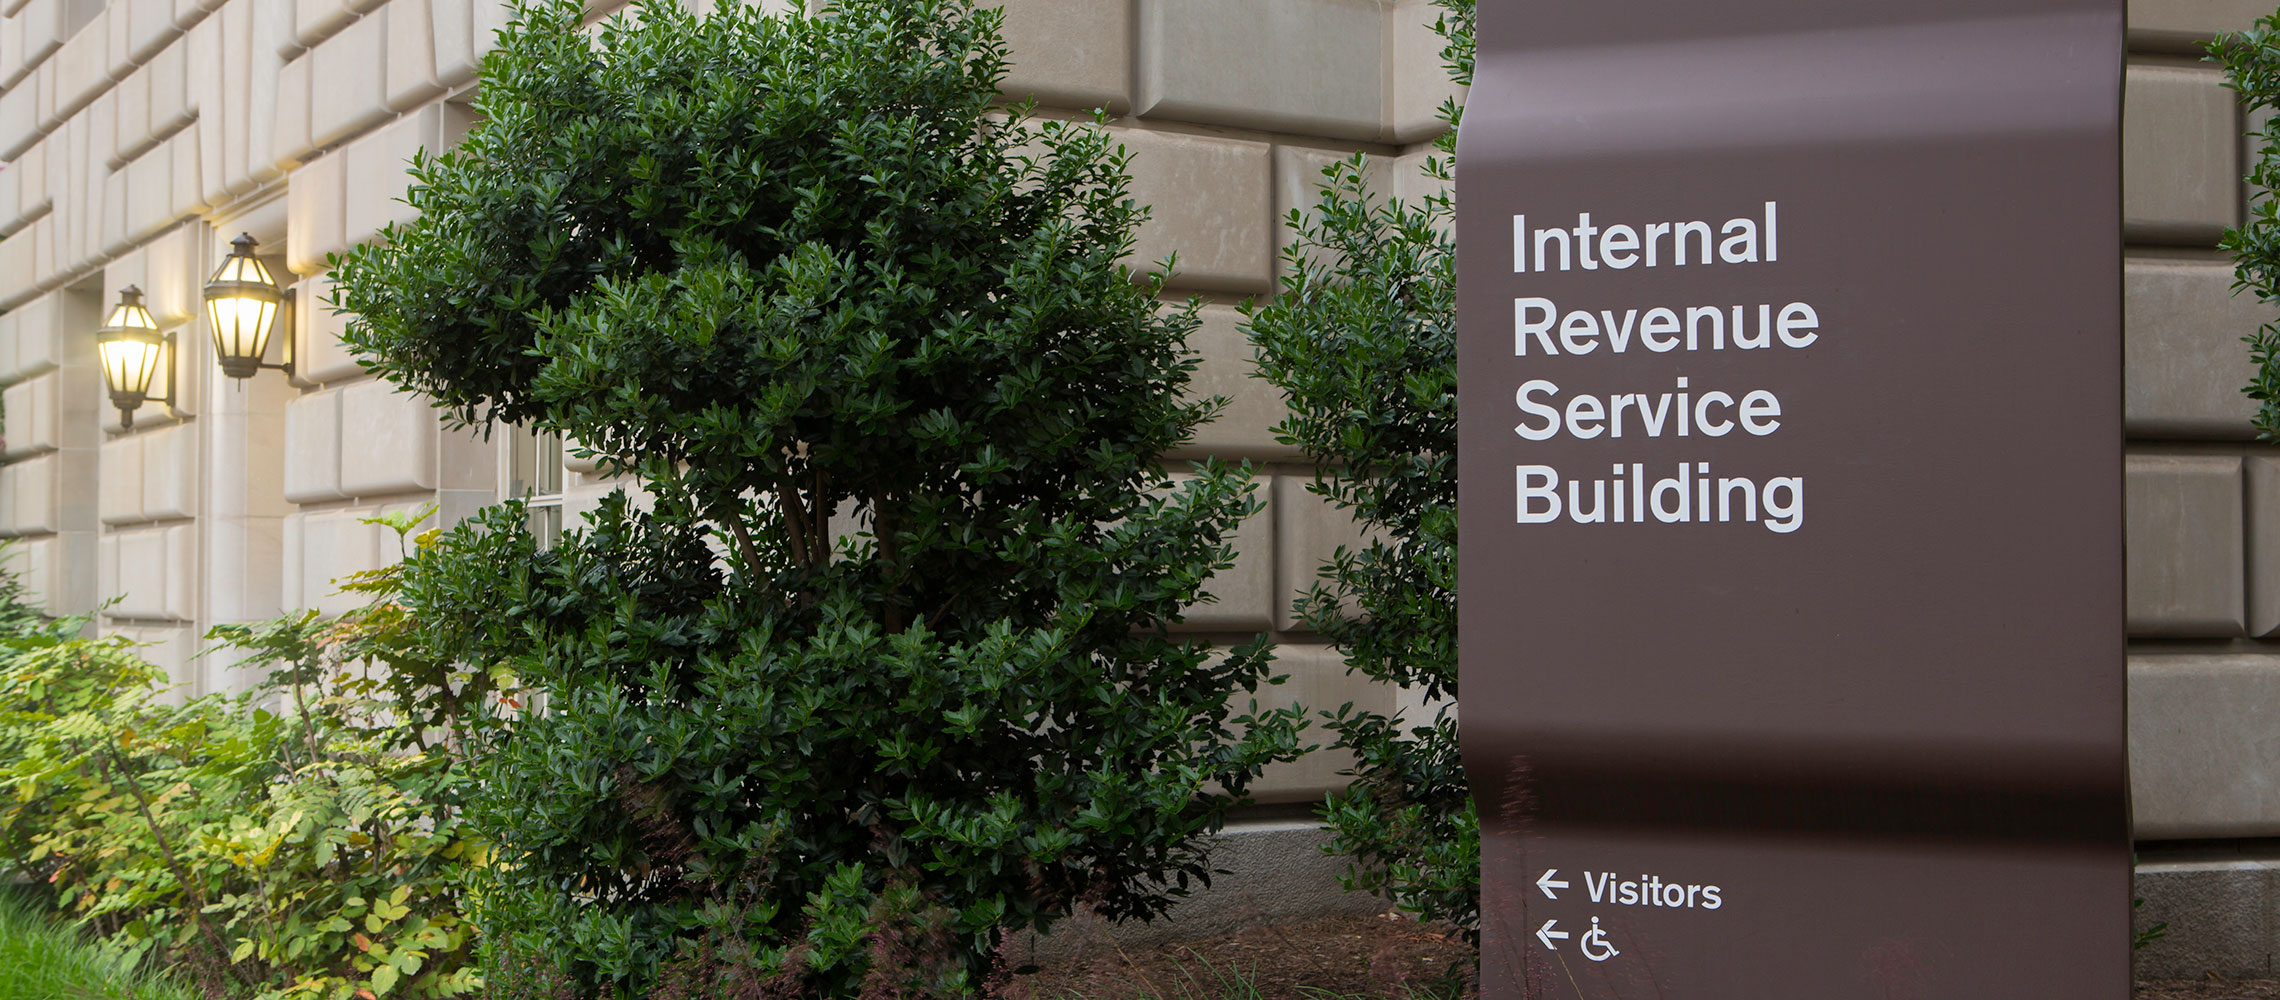 photo of IRS building sign